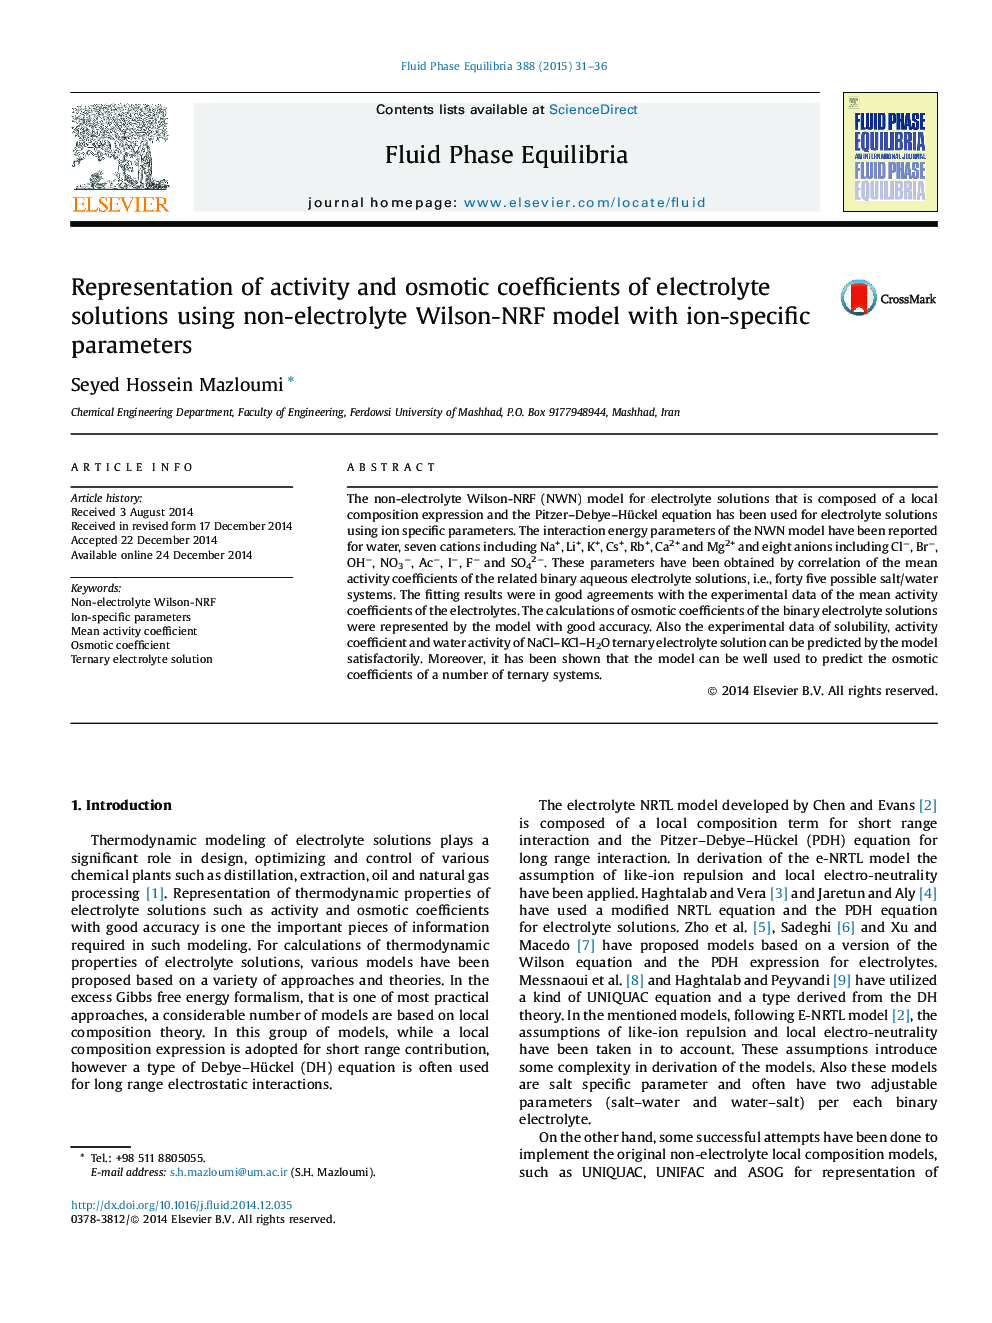 Representation of activity and osmotic coefficients of electrolyte solutions using non-electrolyte Wilson-NRF model with ion-specific parameters